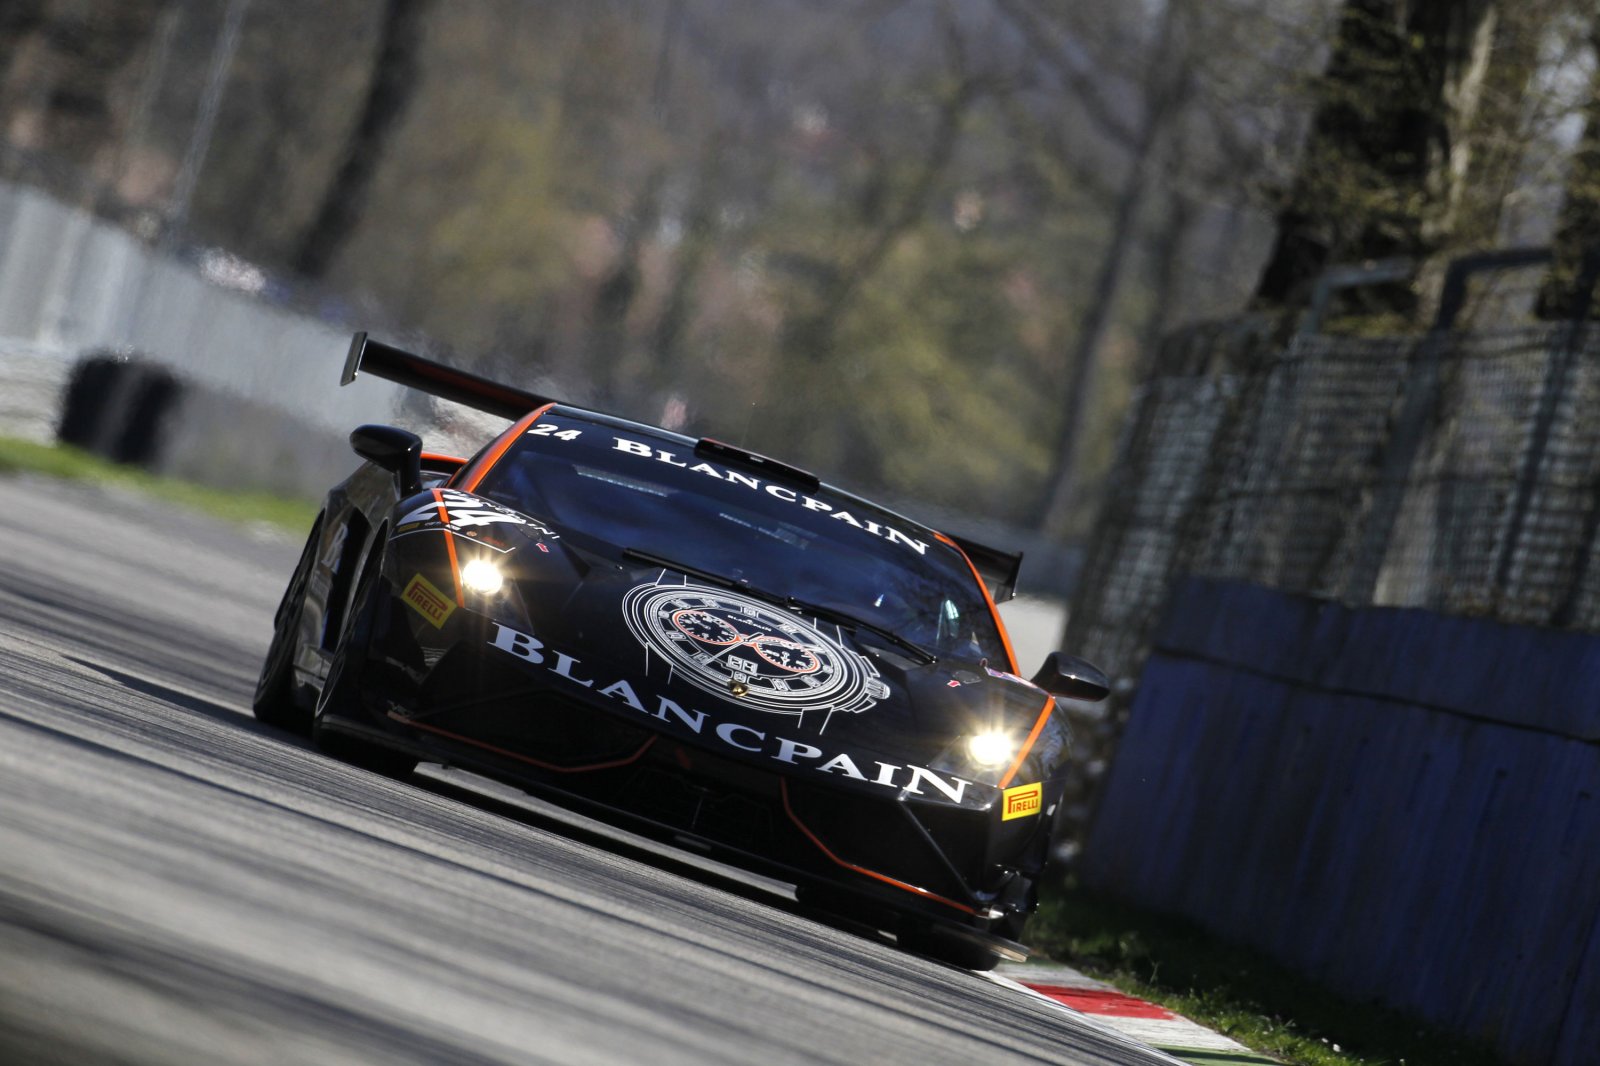 Marc A. Hayek and Peter Kox to contest Blancpain Sprint Series